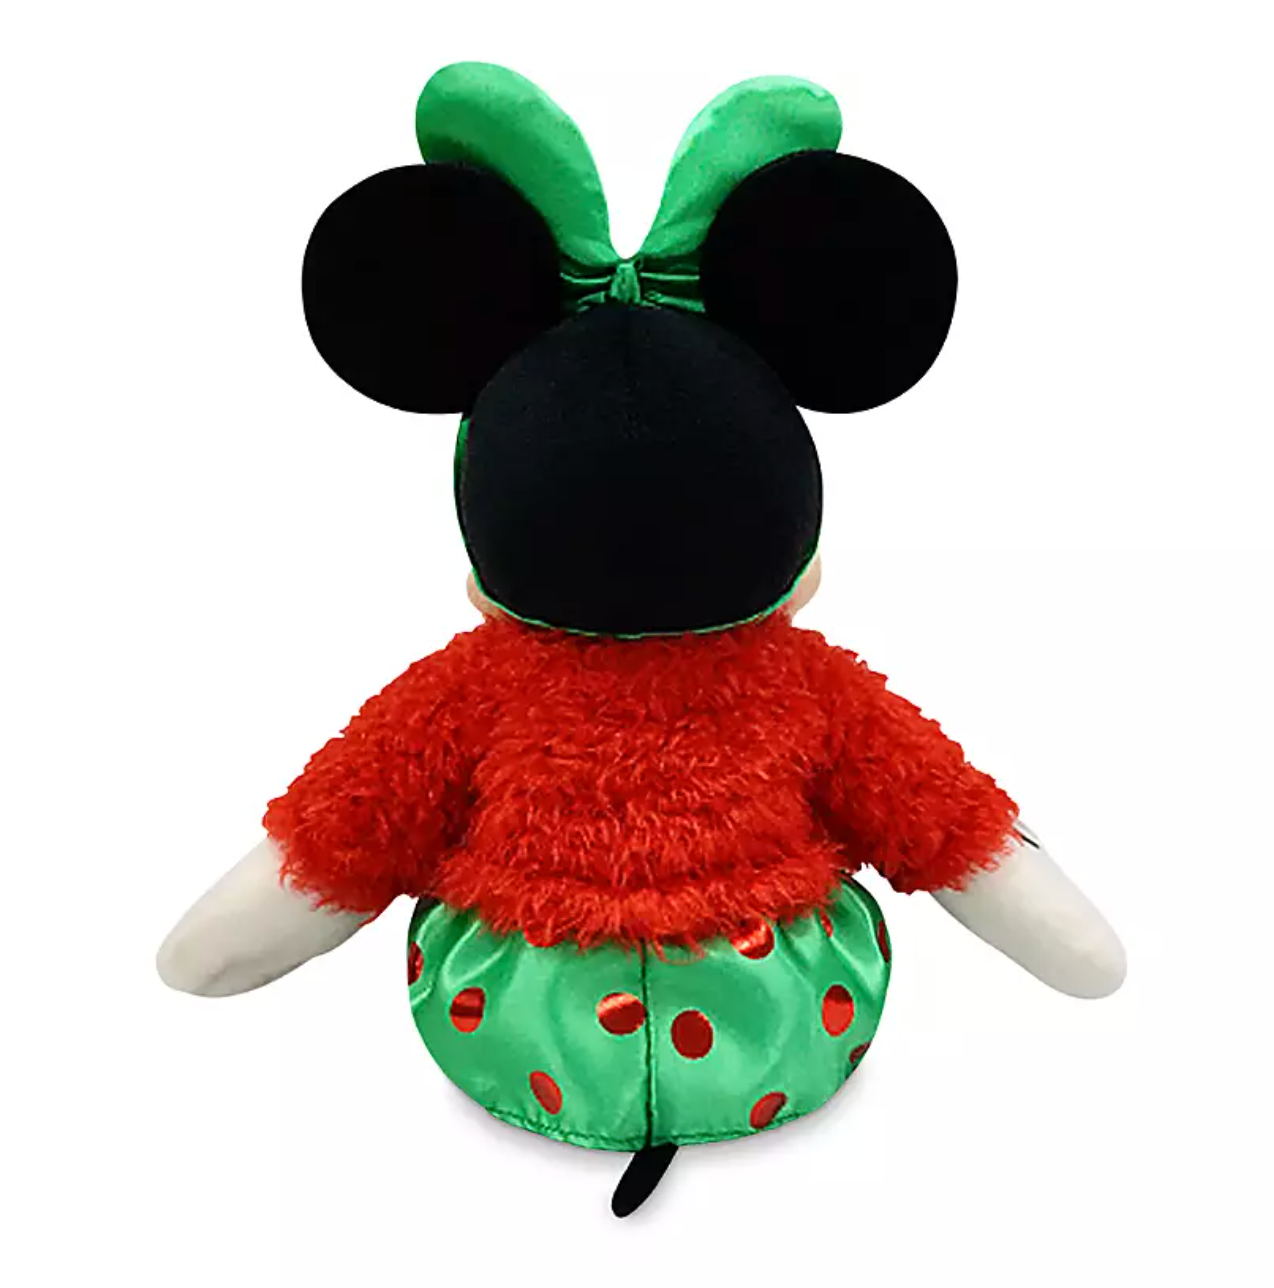 Disney Store 2020 Minnie Mouse Holiday Cheer Christmas Medium Plush New with Tag